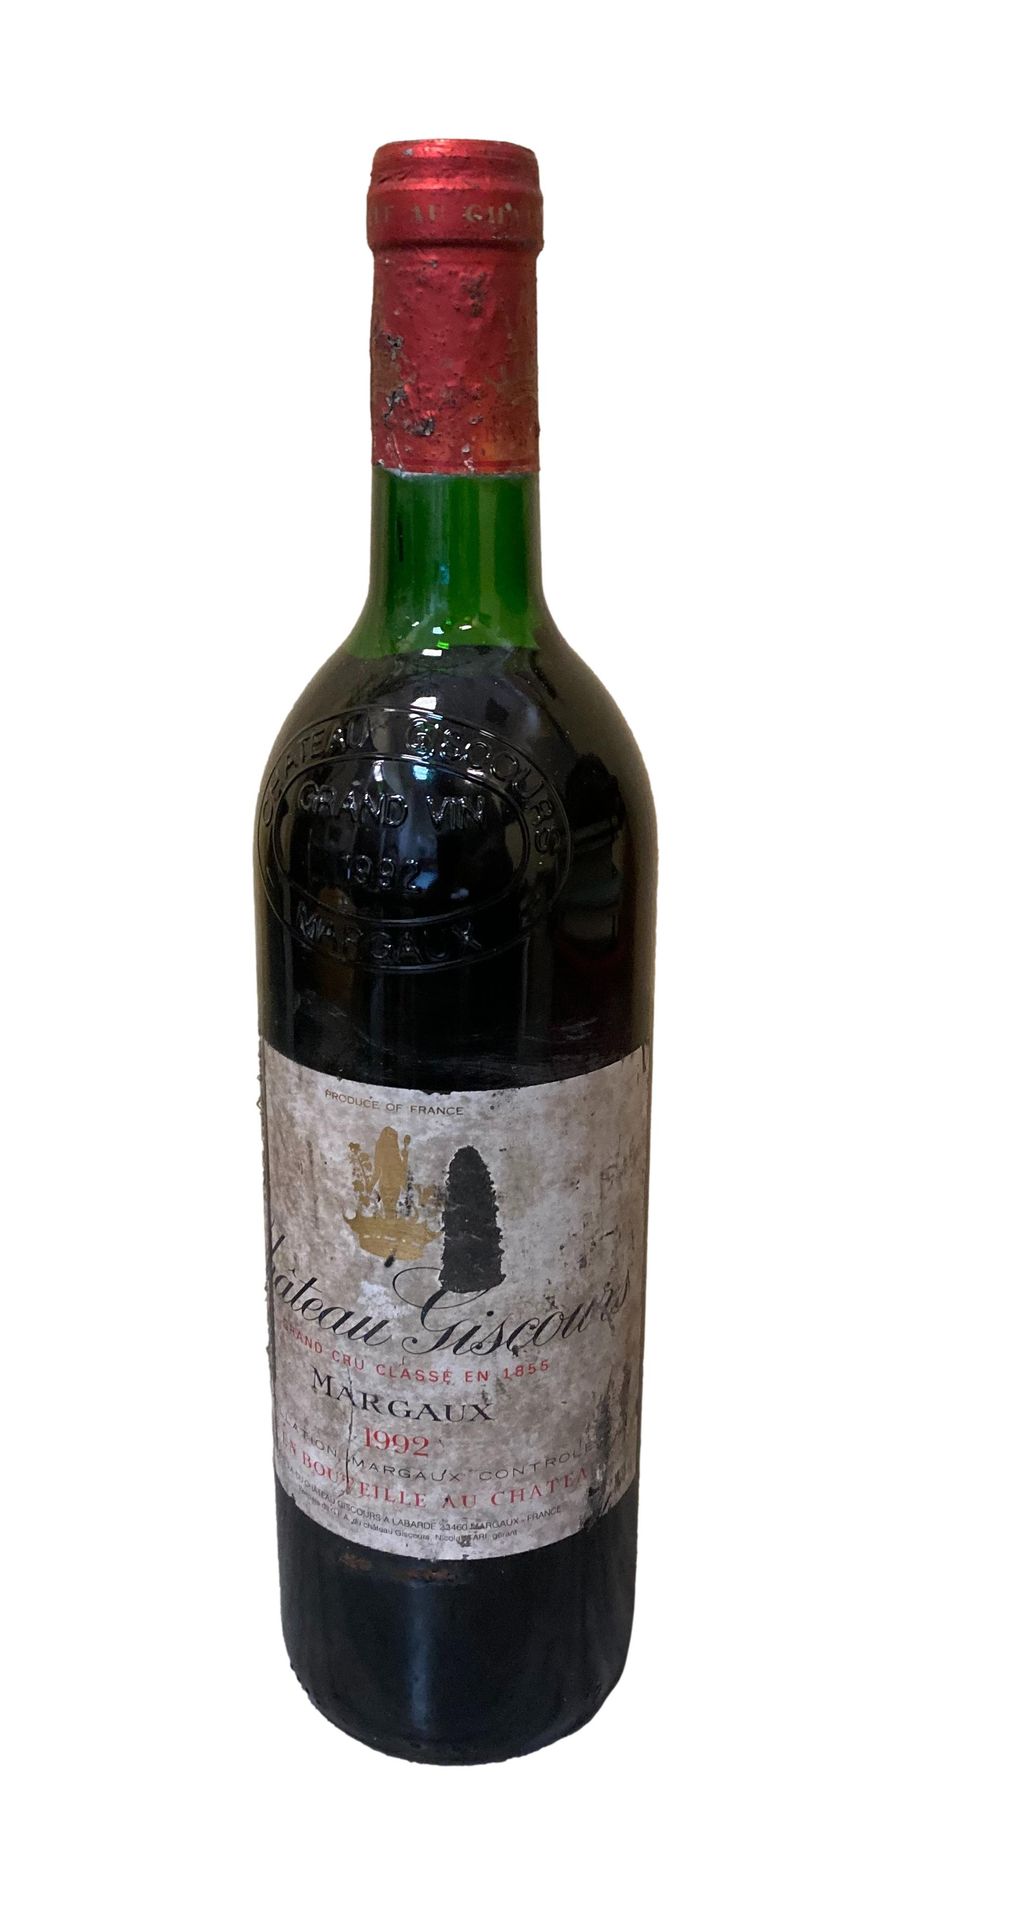 Null CHÂTEAU GISCOURS Margaux 1992
1 bouteille